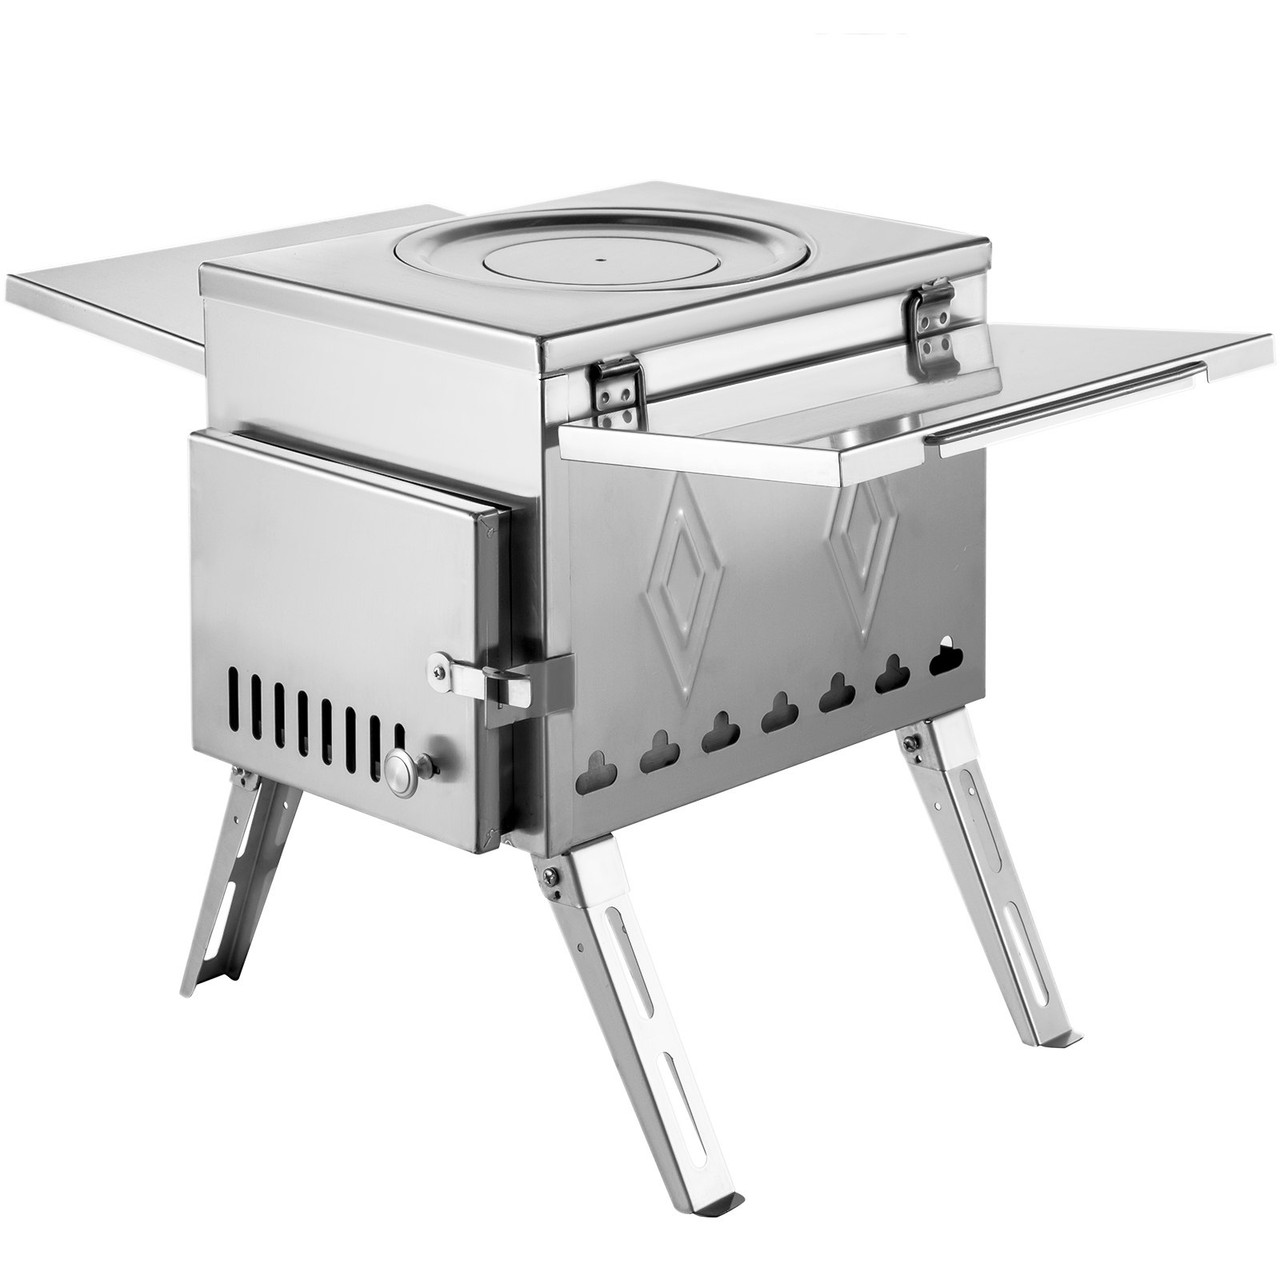 Tent Wood Stove 17.5x14.7x10.6 inch, Camping Wood Stove 304 Stainless Steel With Folding Pipe, Portable Wood Stove 95.7 inch Total Height For